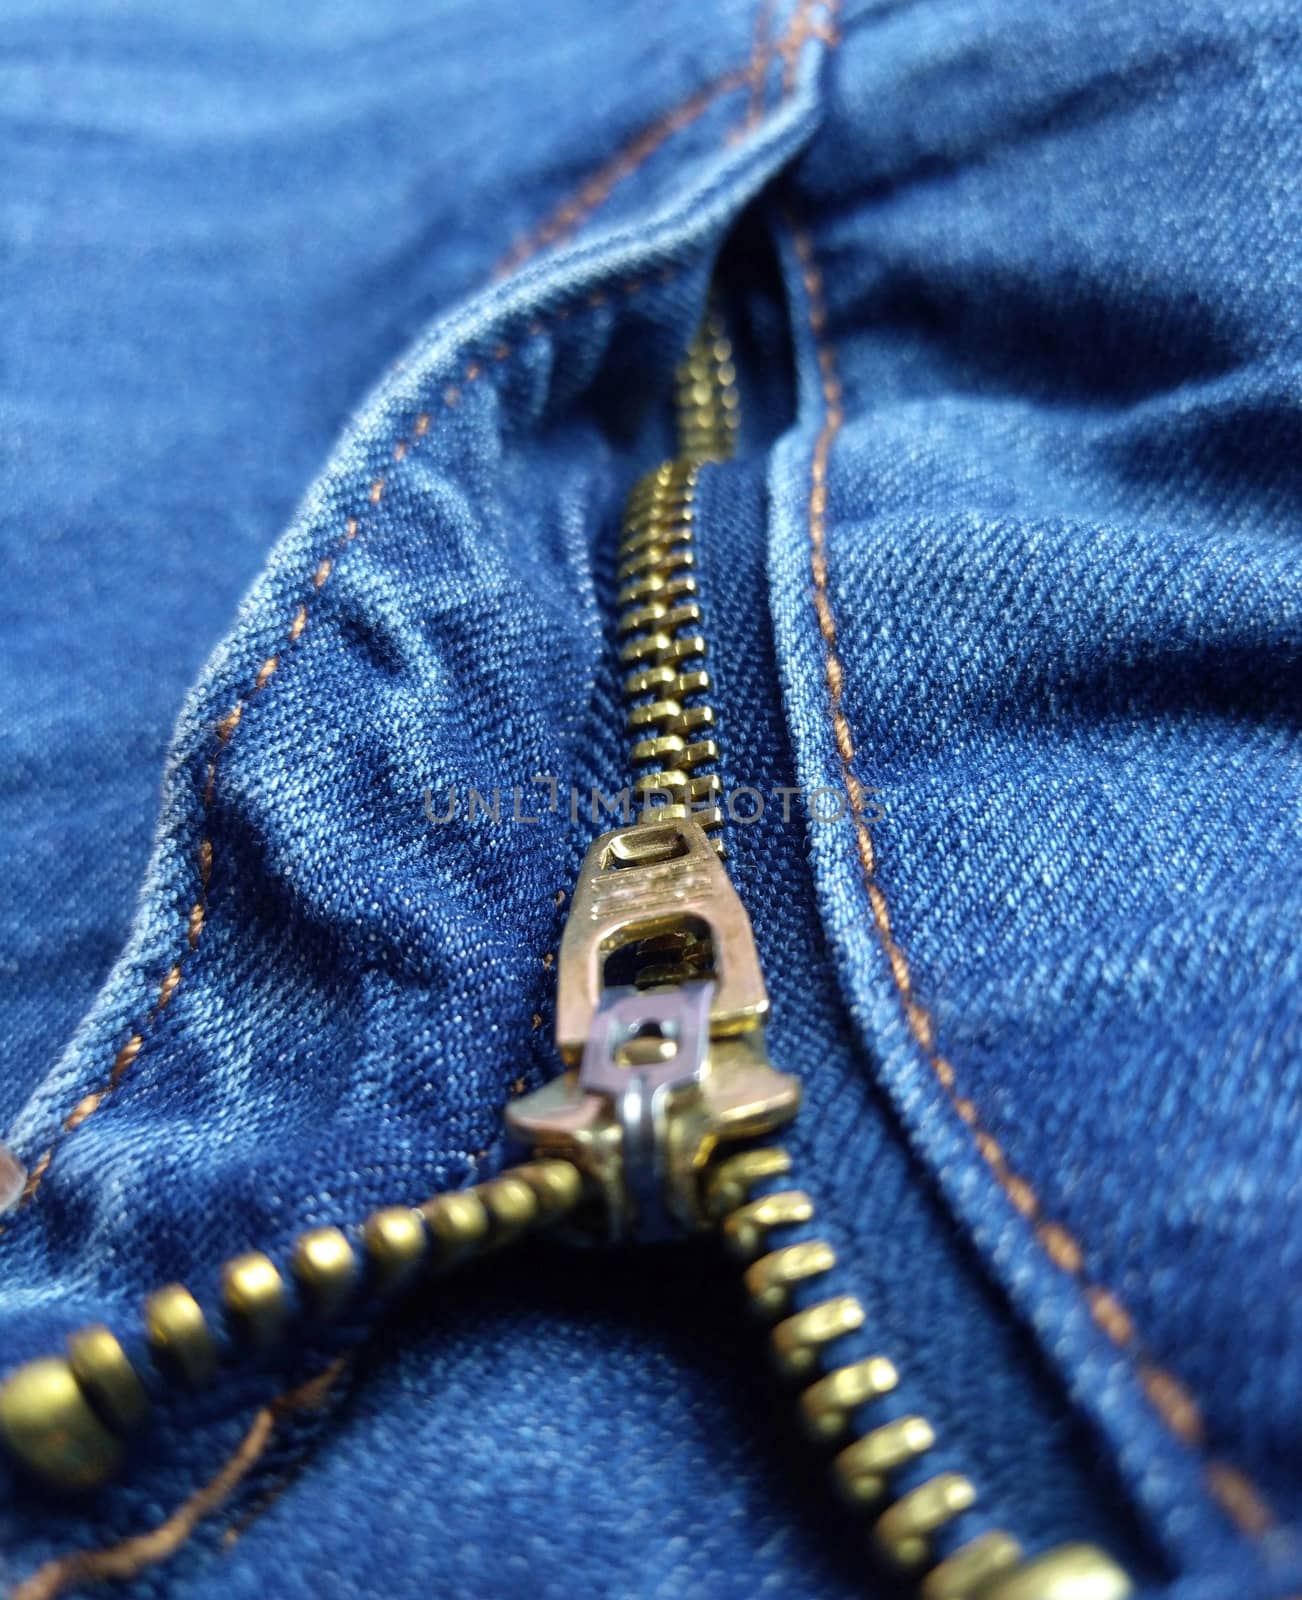 A pair of jeans close up with sewing detail